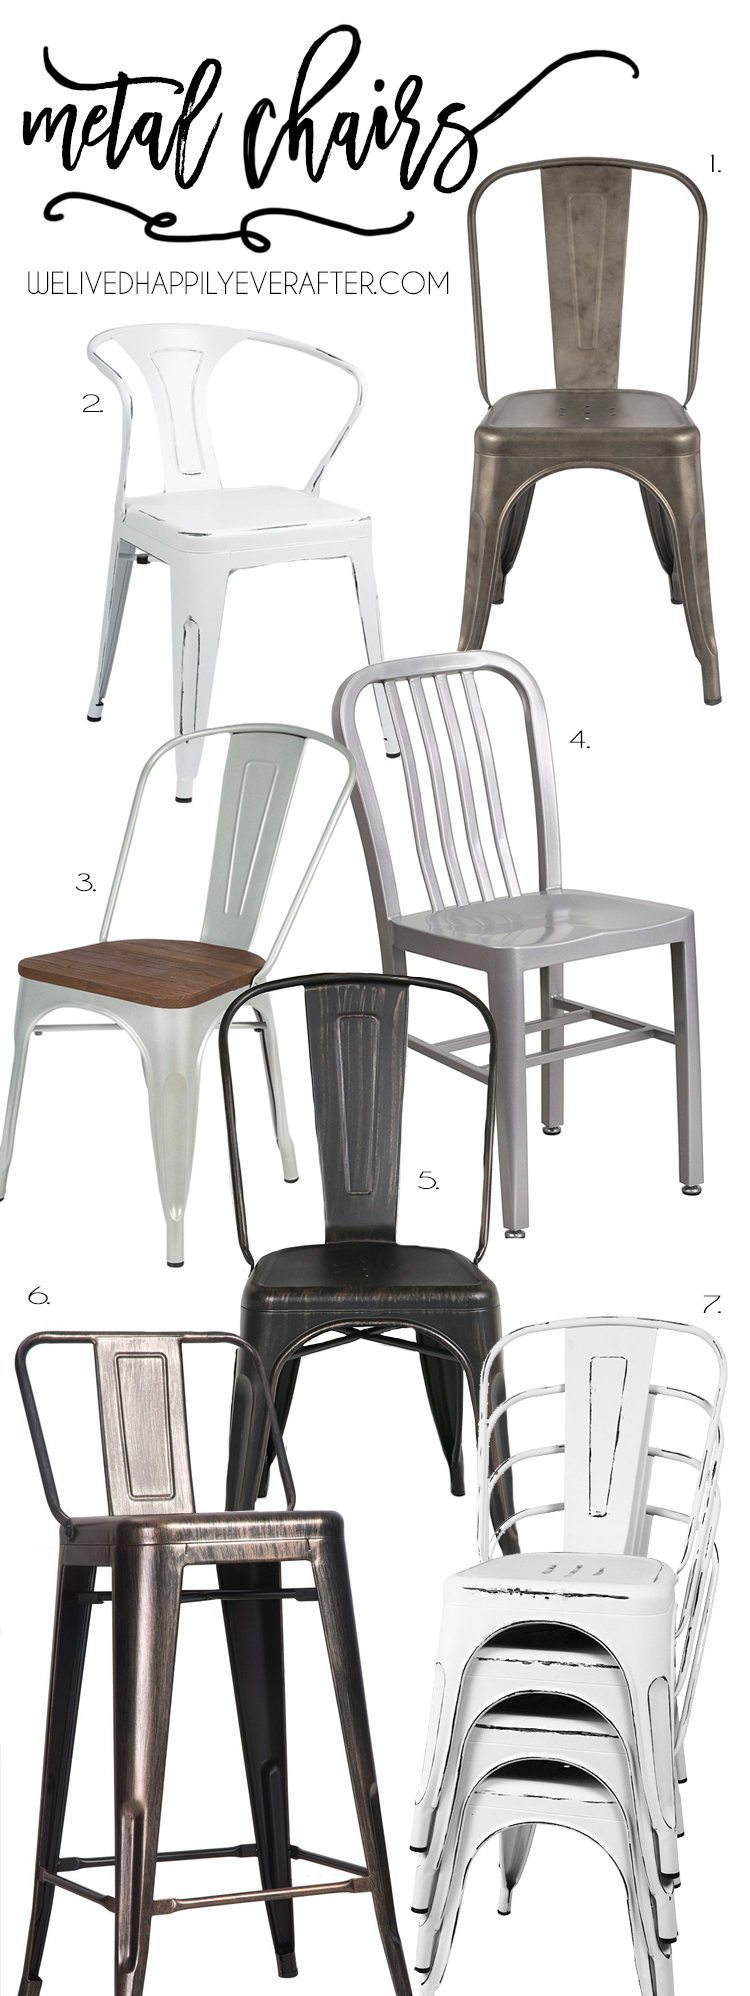 Industrial Farmhouse Fixer Upper Style Metal Chairs For your Home